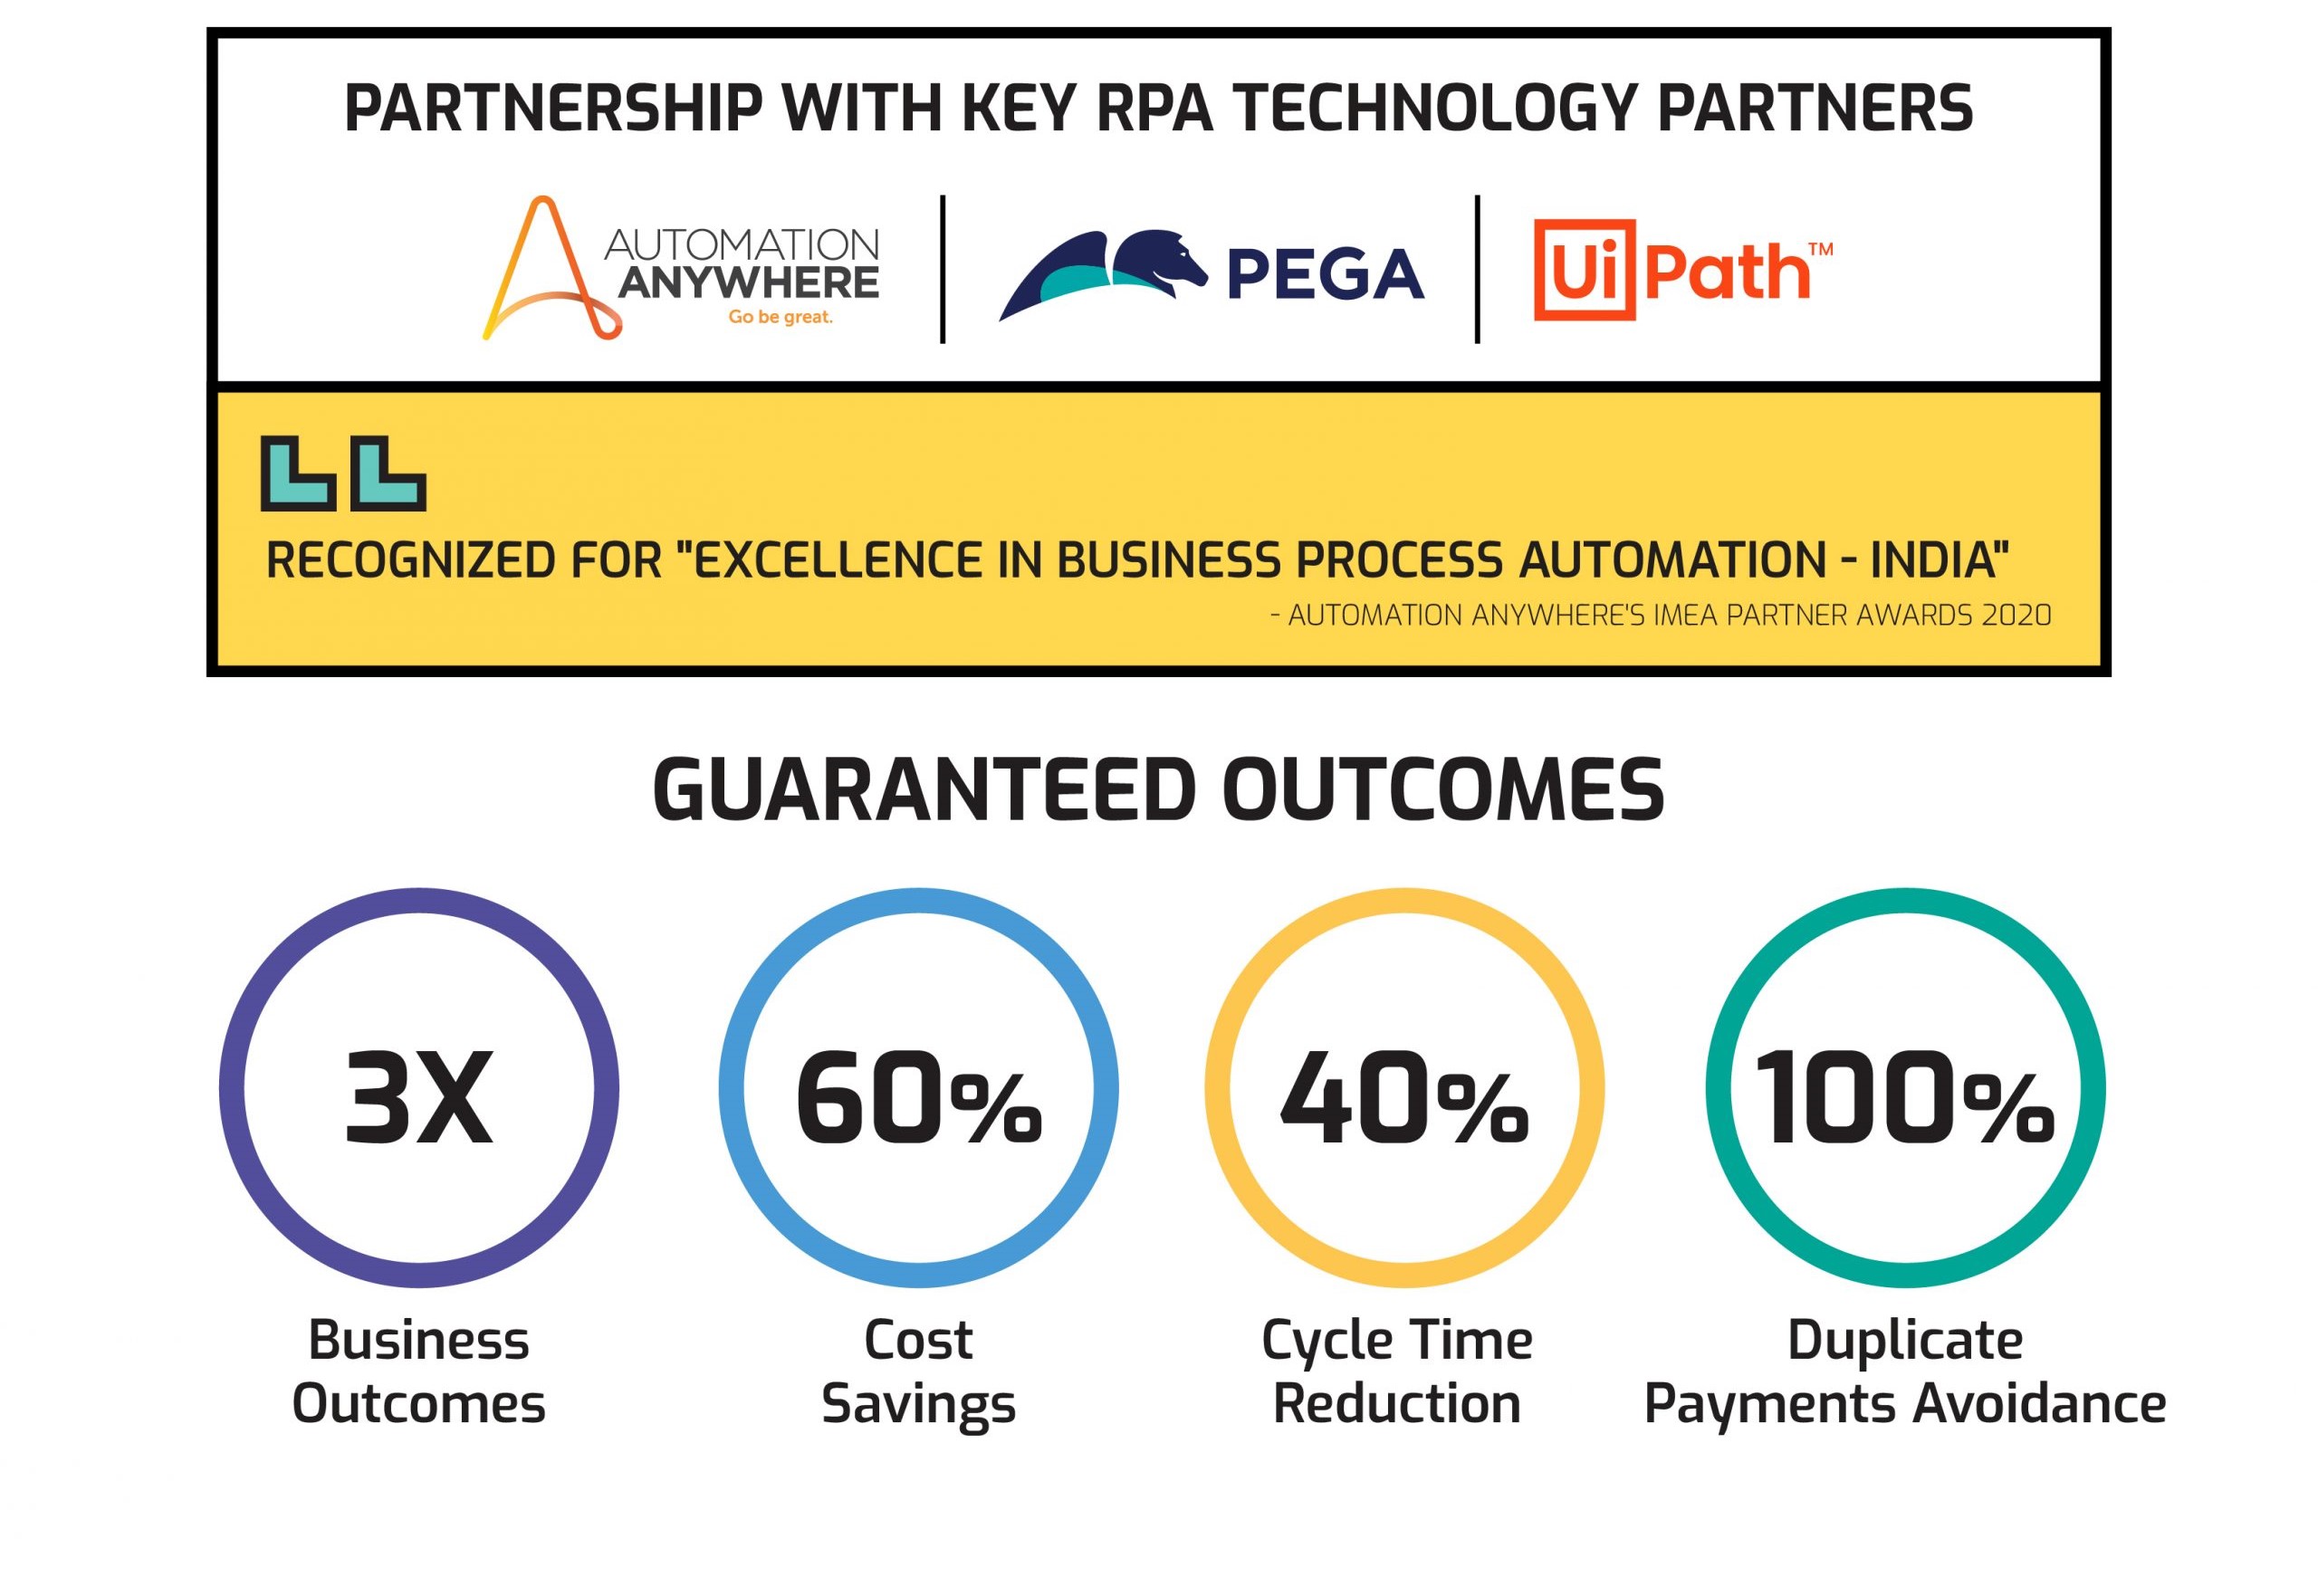 Partnership With Key RPA Technology Partners